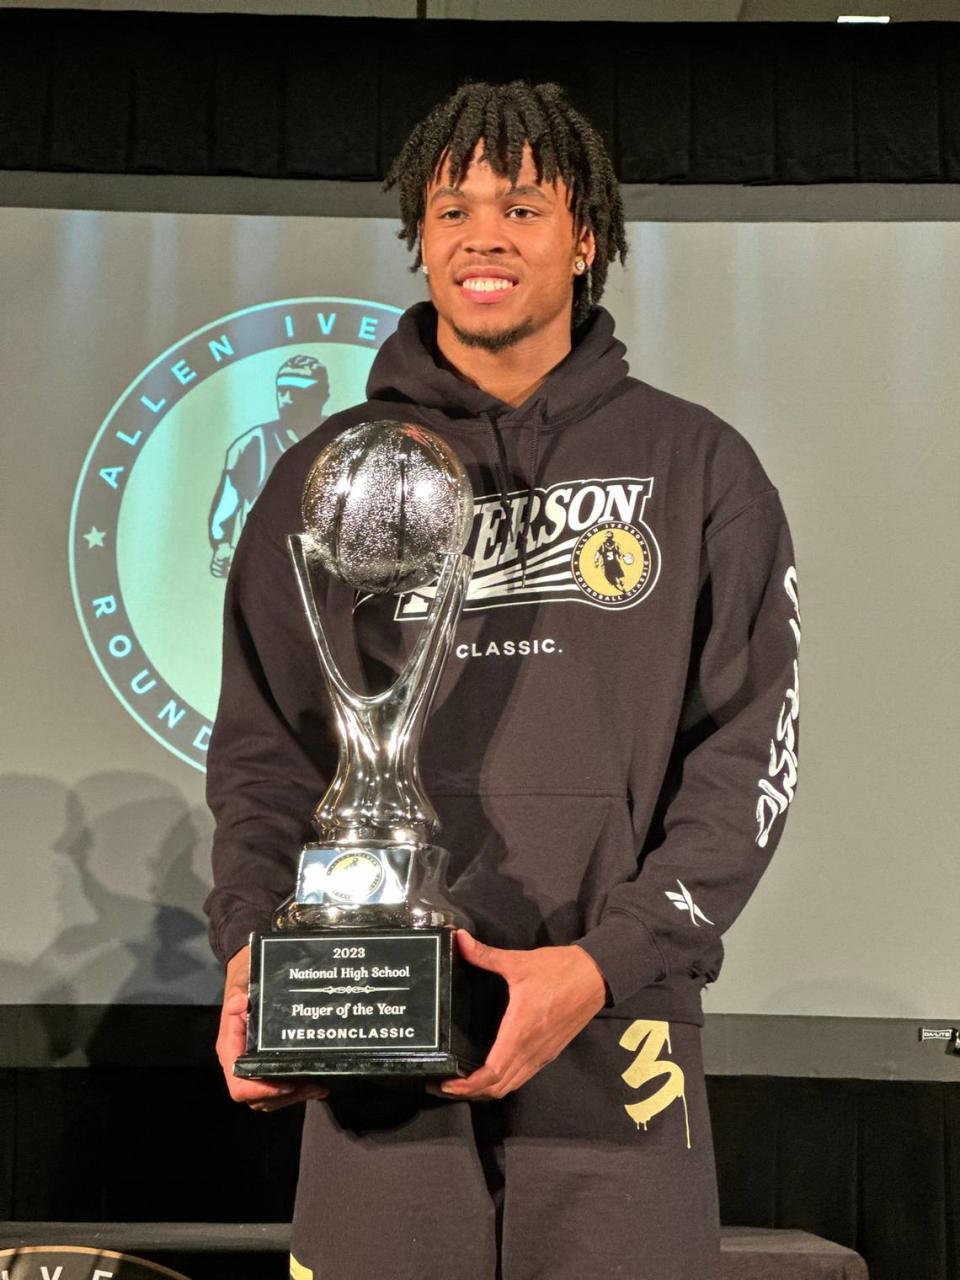 Incoming Kentucky freshman DJ Wagner was named the National High School Player of the Year by the Iverson Classic last week. He was then named a co-MVP of the Iverson Classic game Saturday night, along with fellow incoming UK player Justin Edwards.